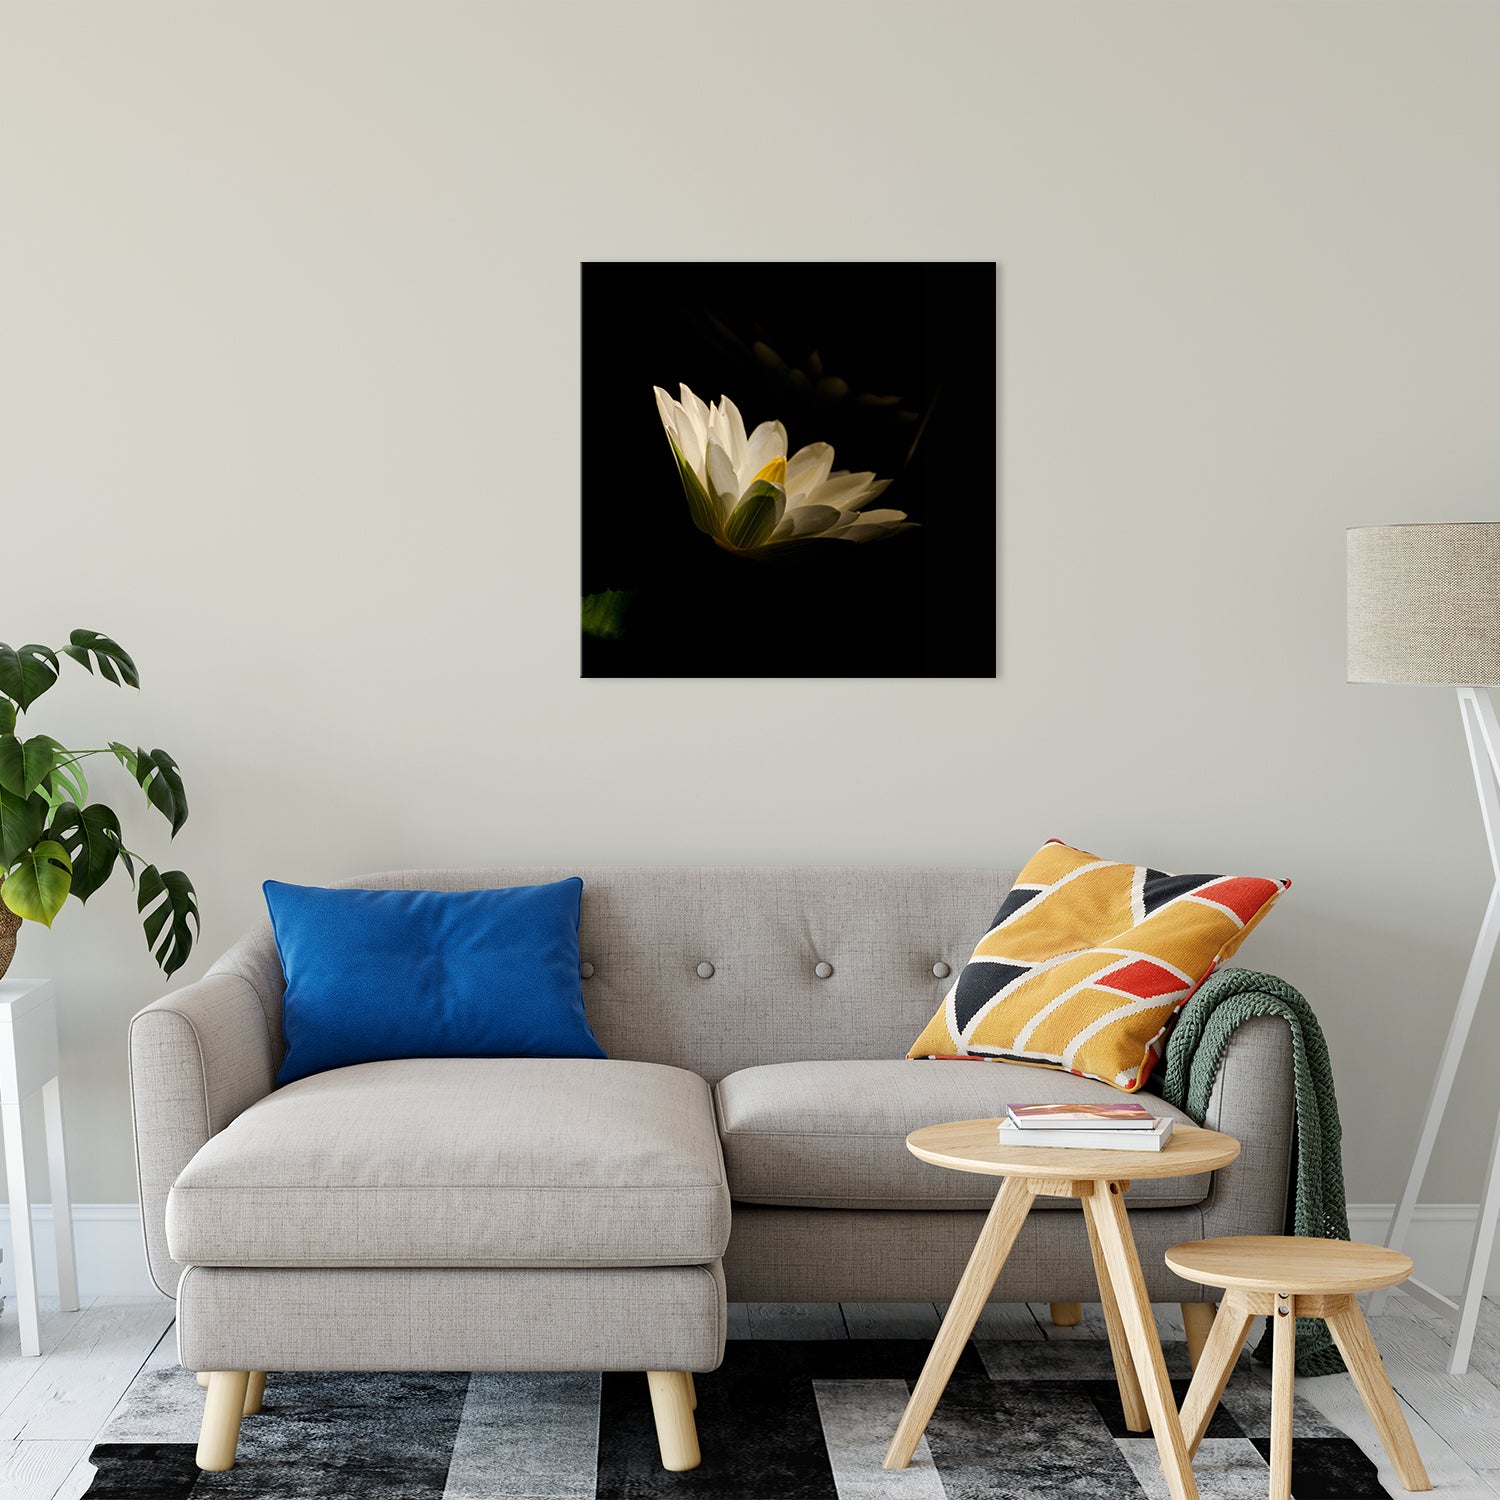 Spotlight on Waterlily - Square Nature / Floral Photo Fine Art & Unframed Wall Art Prints 30" x 30" / Fine Art Canvas - PIPAFINEART